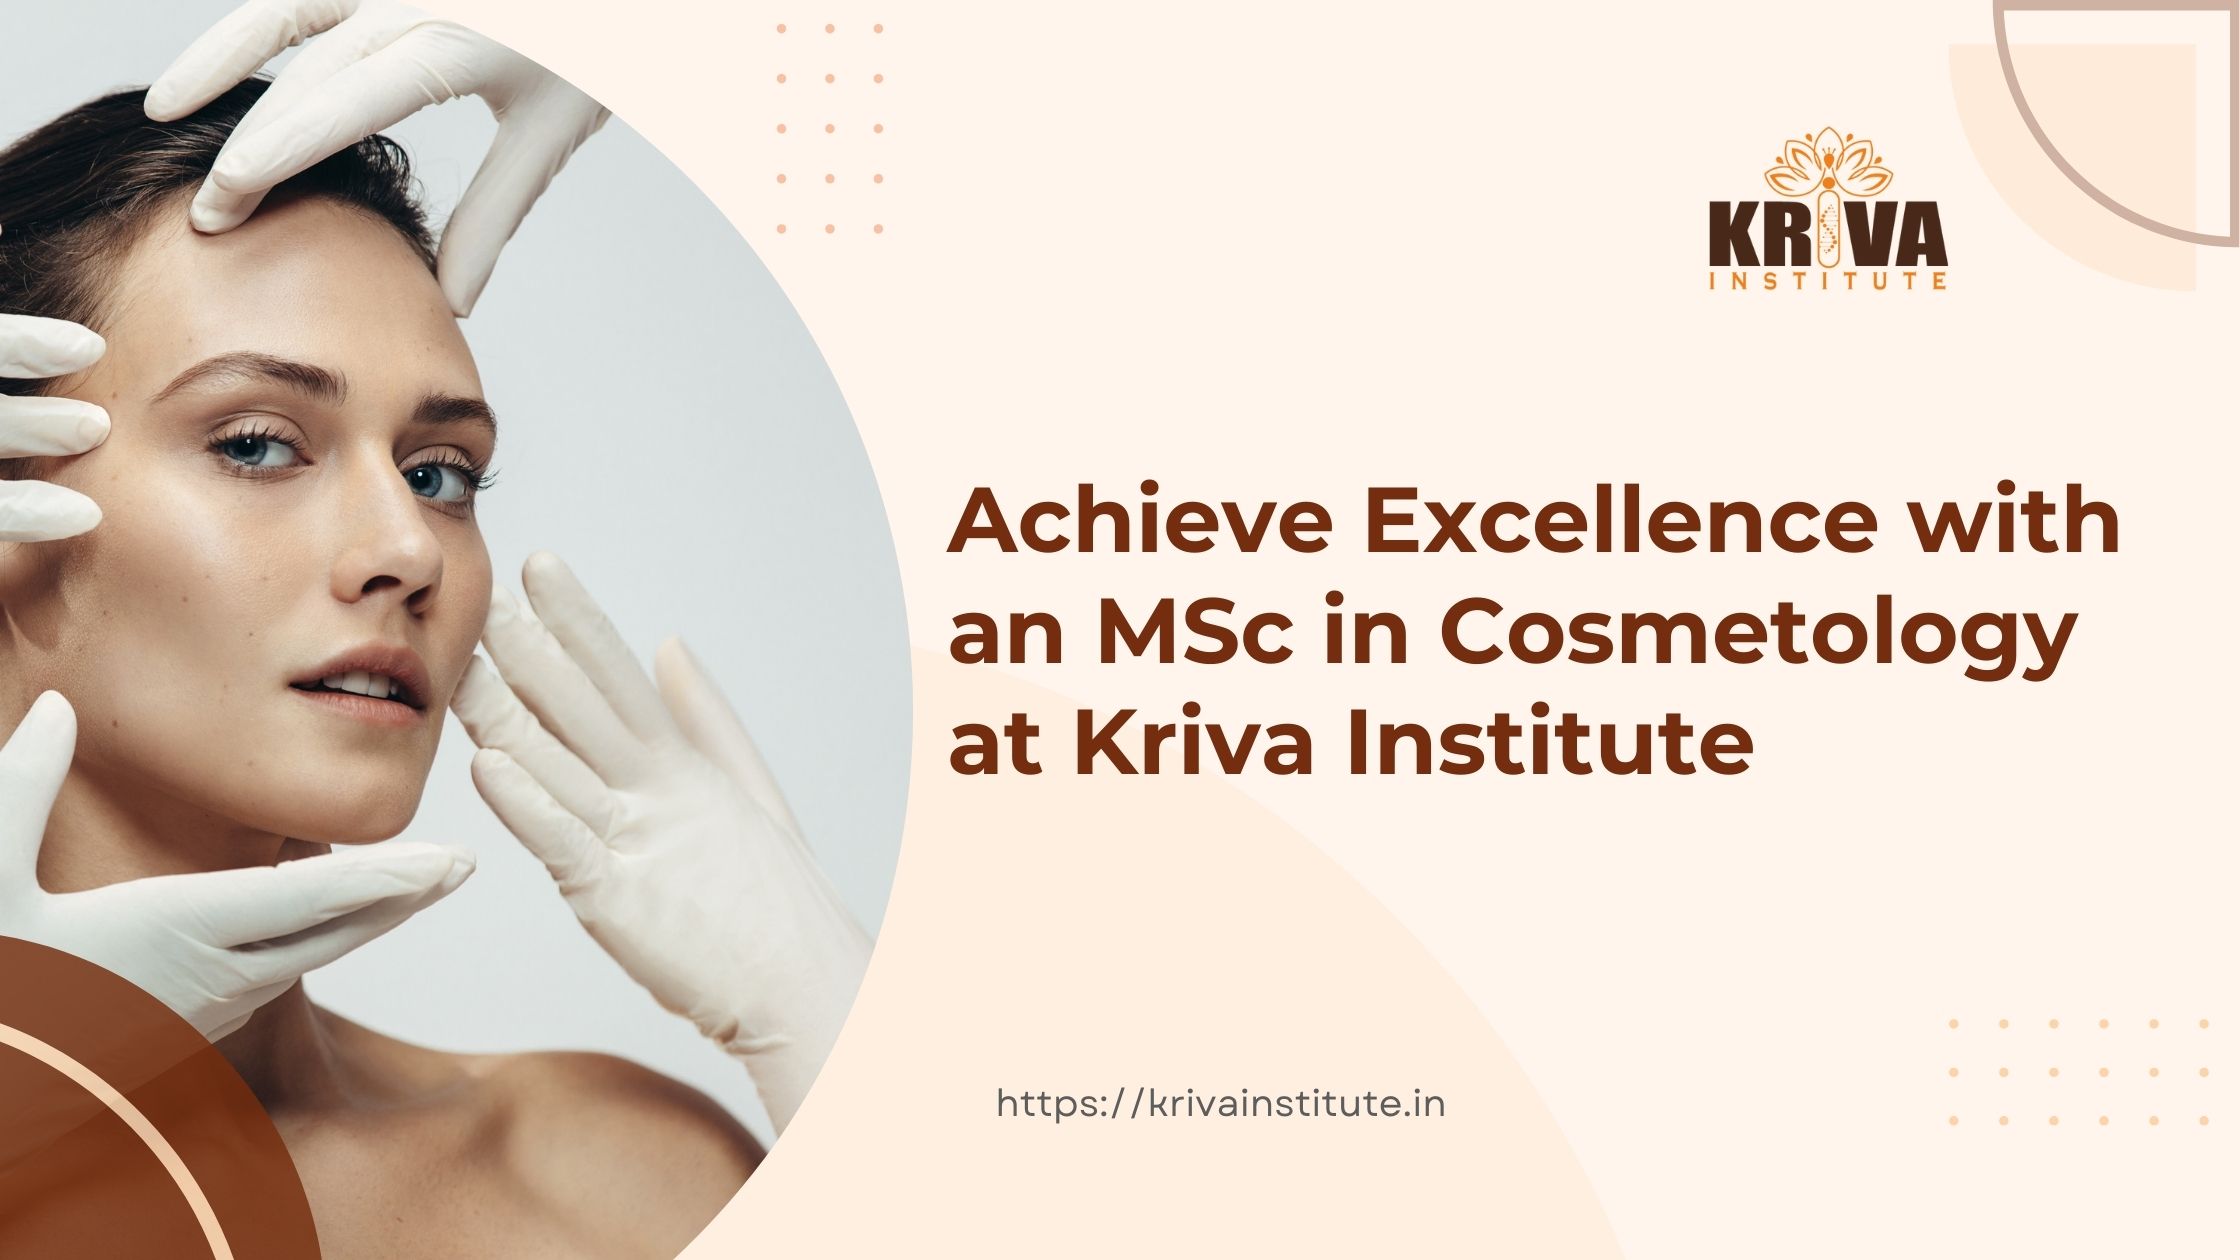 Achieve Excellence with an MSc in Cosmetology at Kriva Institute